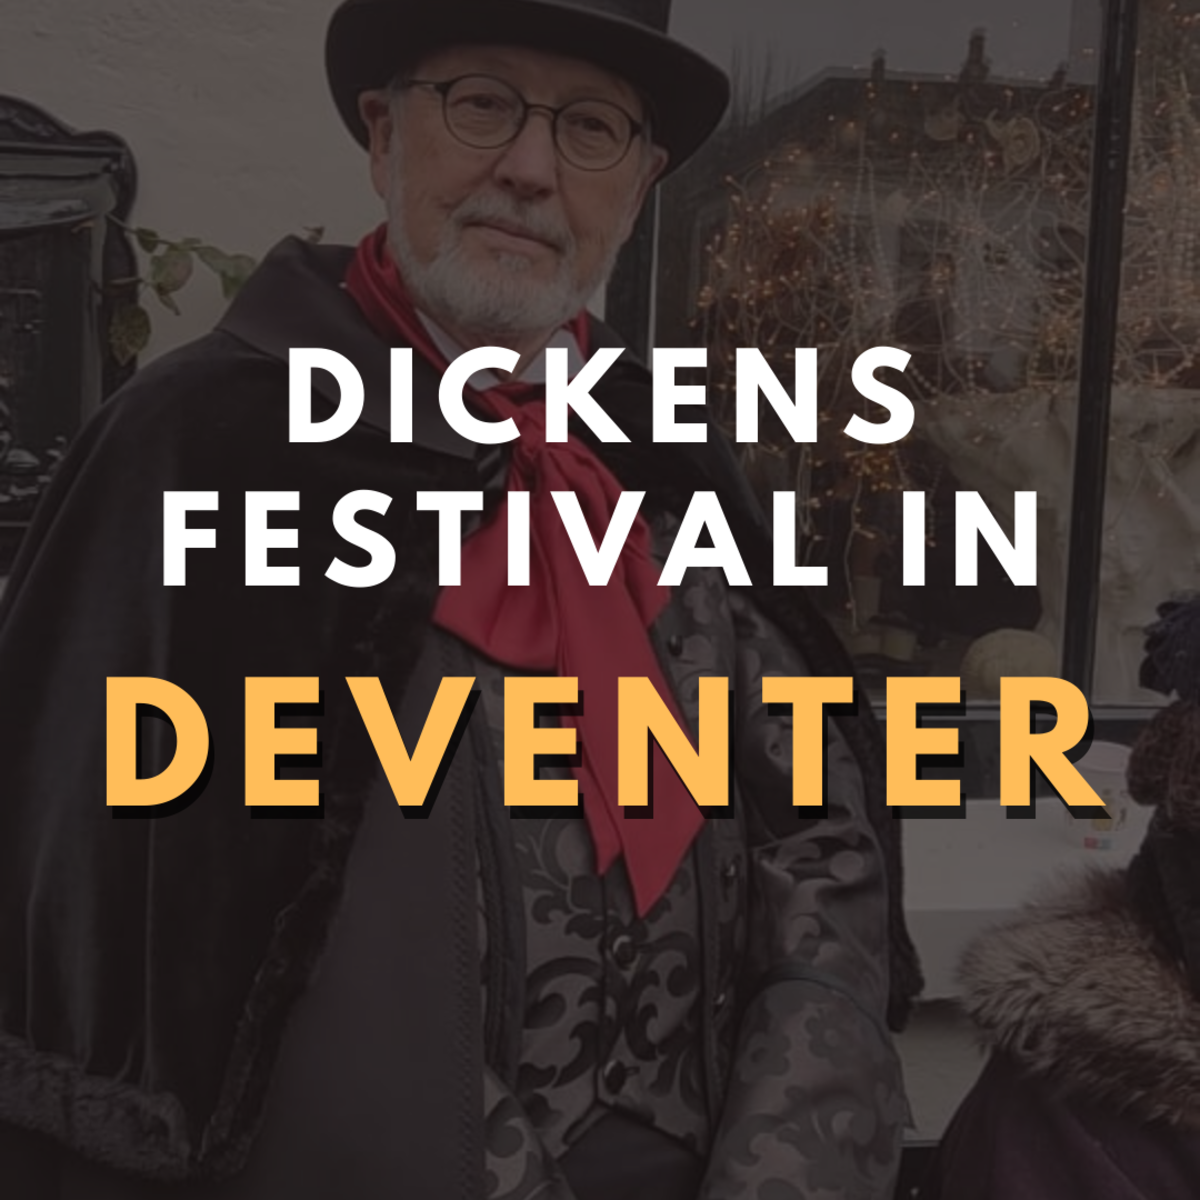 Experiencing the Dickens Festival in Deventer, Netherlands